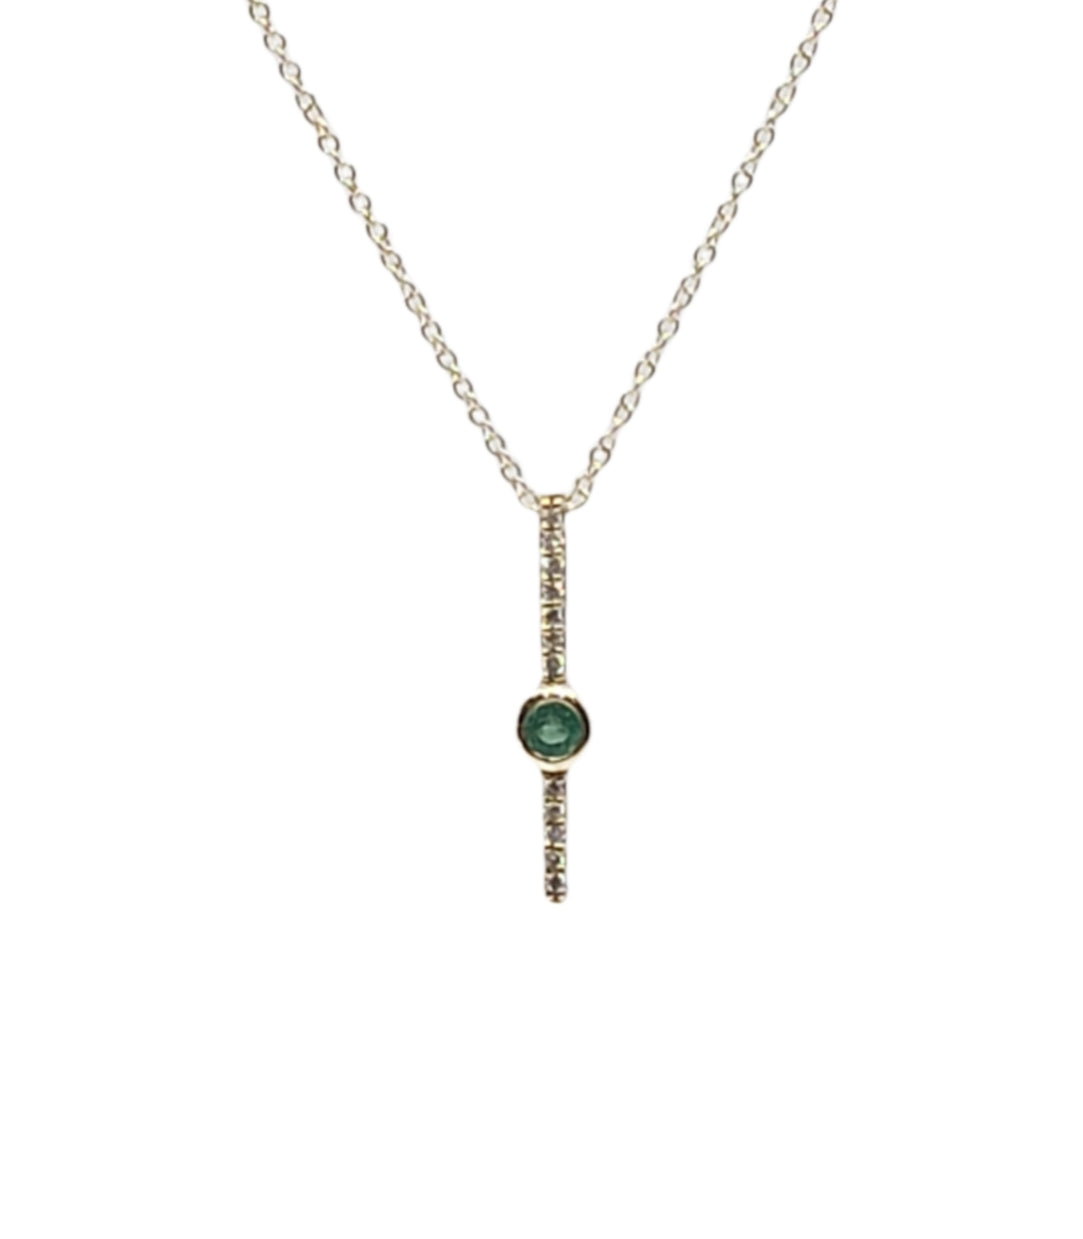 10K Yellow Gold 0.07cttw Emerald and 0.05cttw Diamond Necklace with Cable Chain (Spring Clasp) - Adjustable 17 - 18 Inches